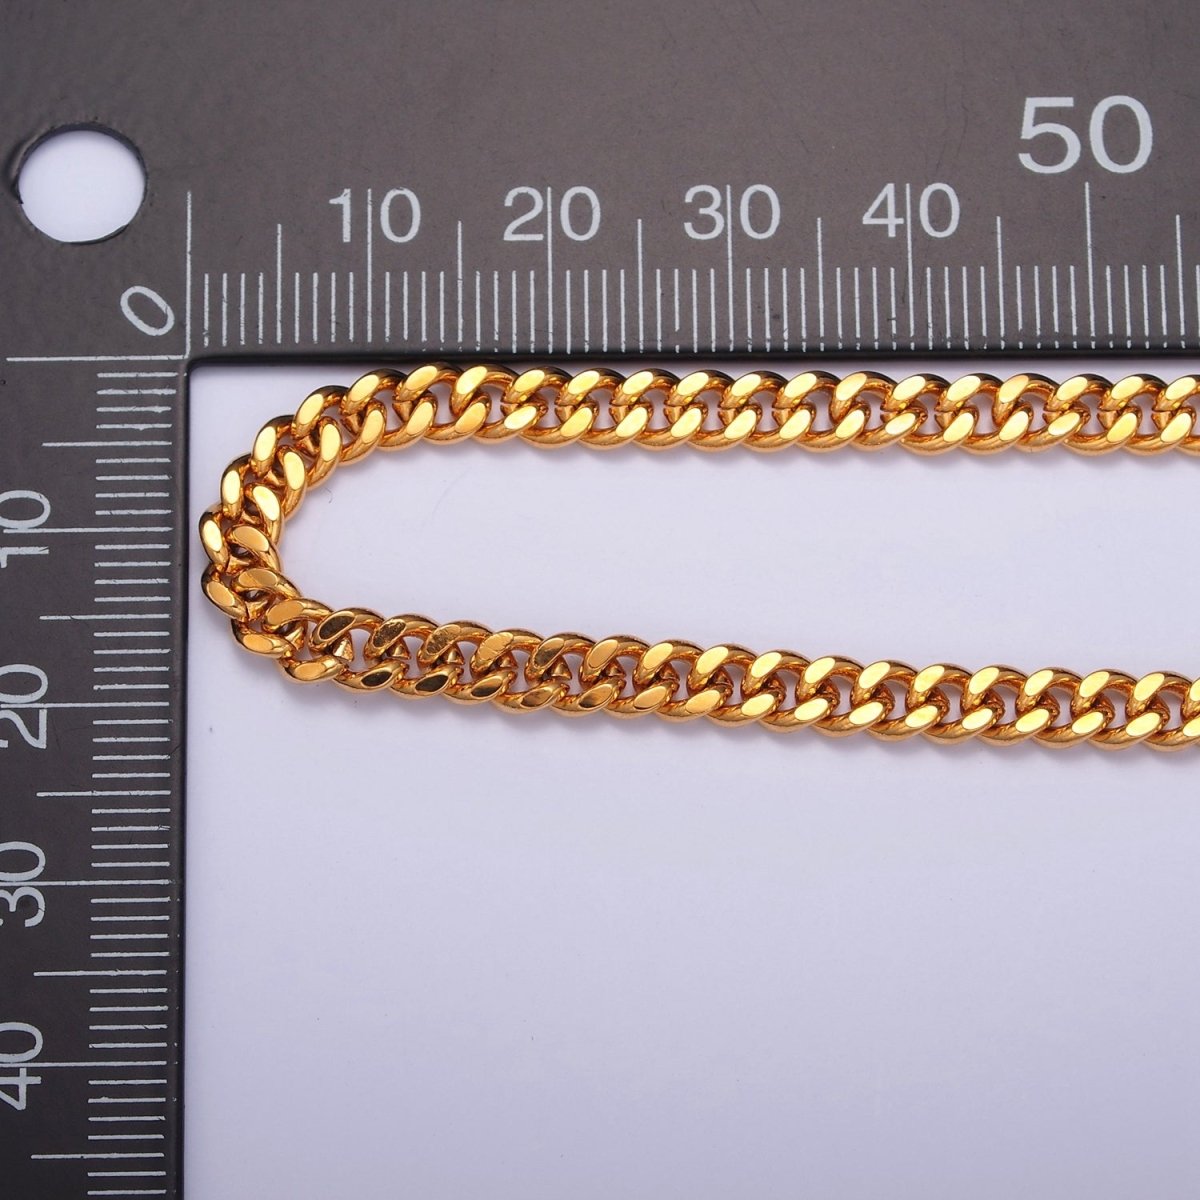 Miami Cuban Curb Link Unfinished Chain, 4.5mm 24k Gold Filled Chain 19.5 inch long | WA-1400 Clearance Pricing - DLUXCA